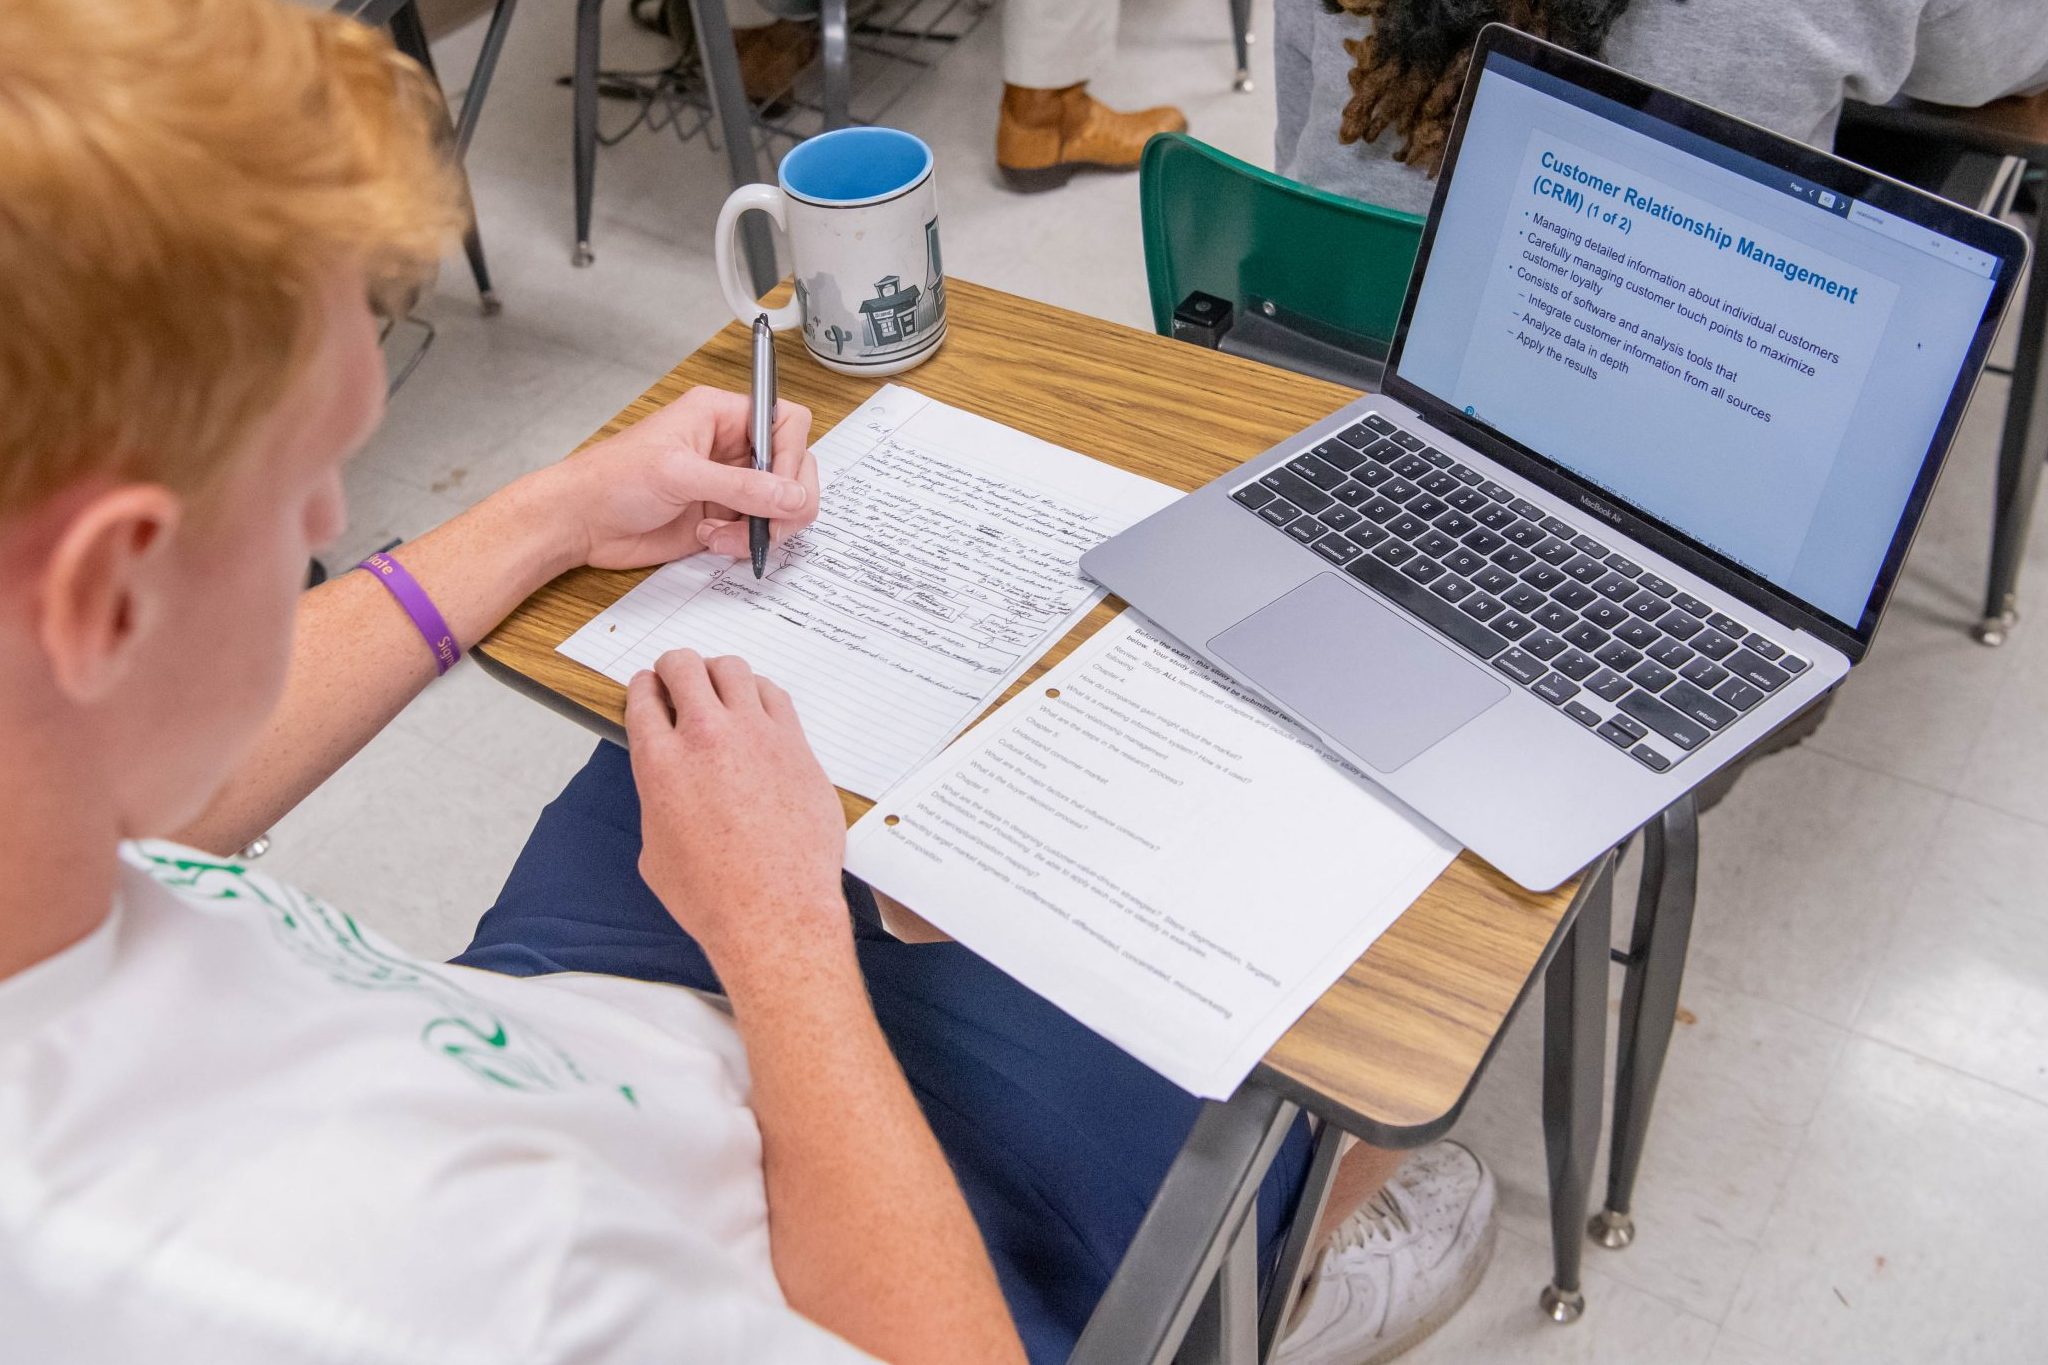 Student sitting at a desk in a classroom, taking notes on paper, and looking at a PowerPoint presentation open on his laptop.